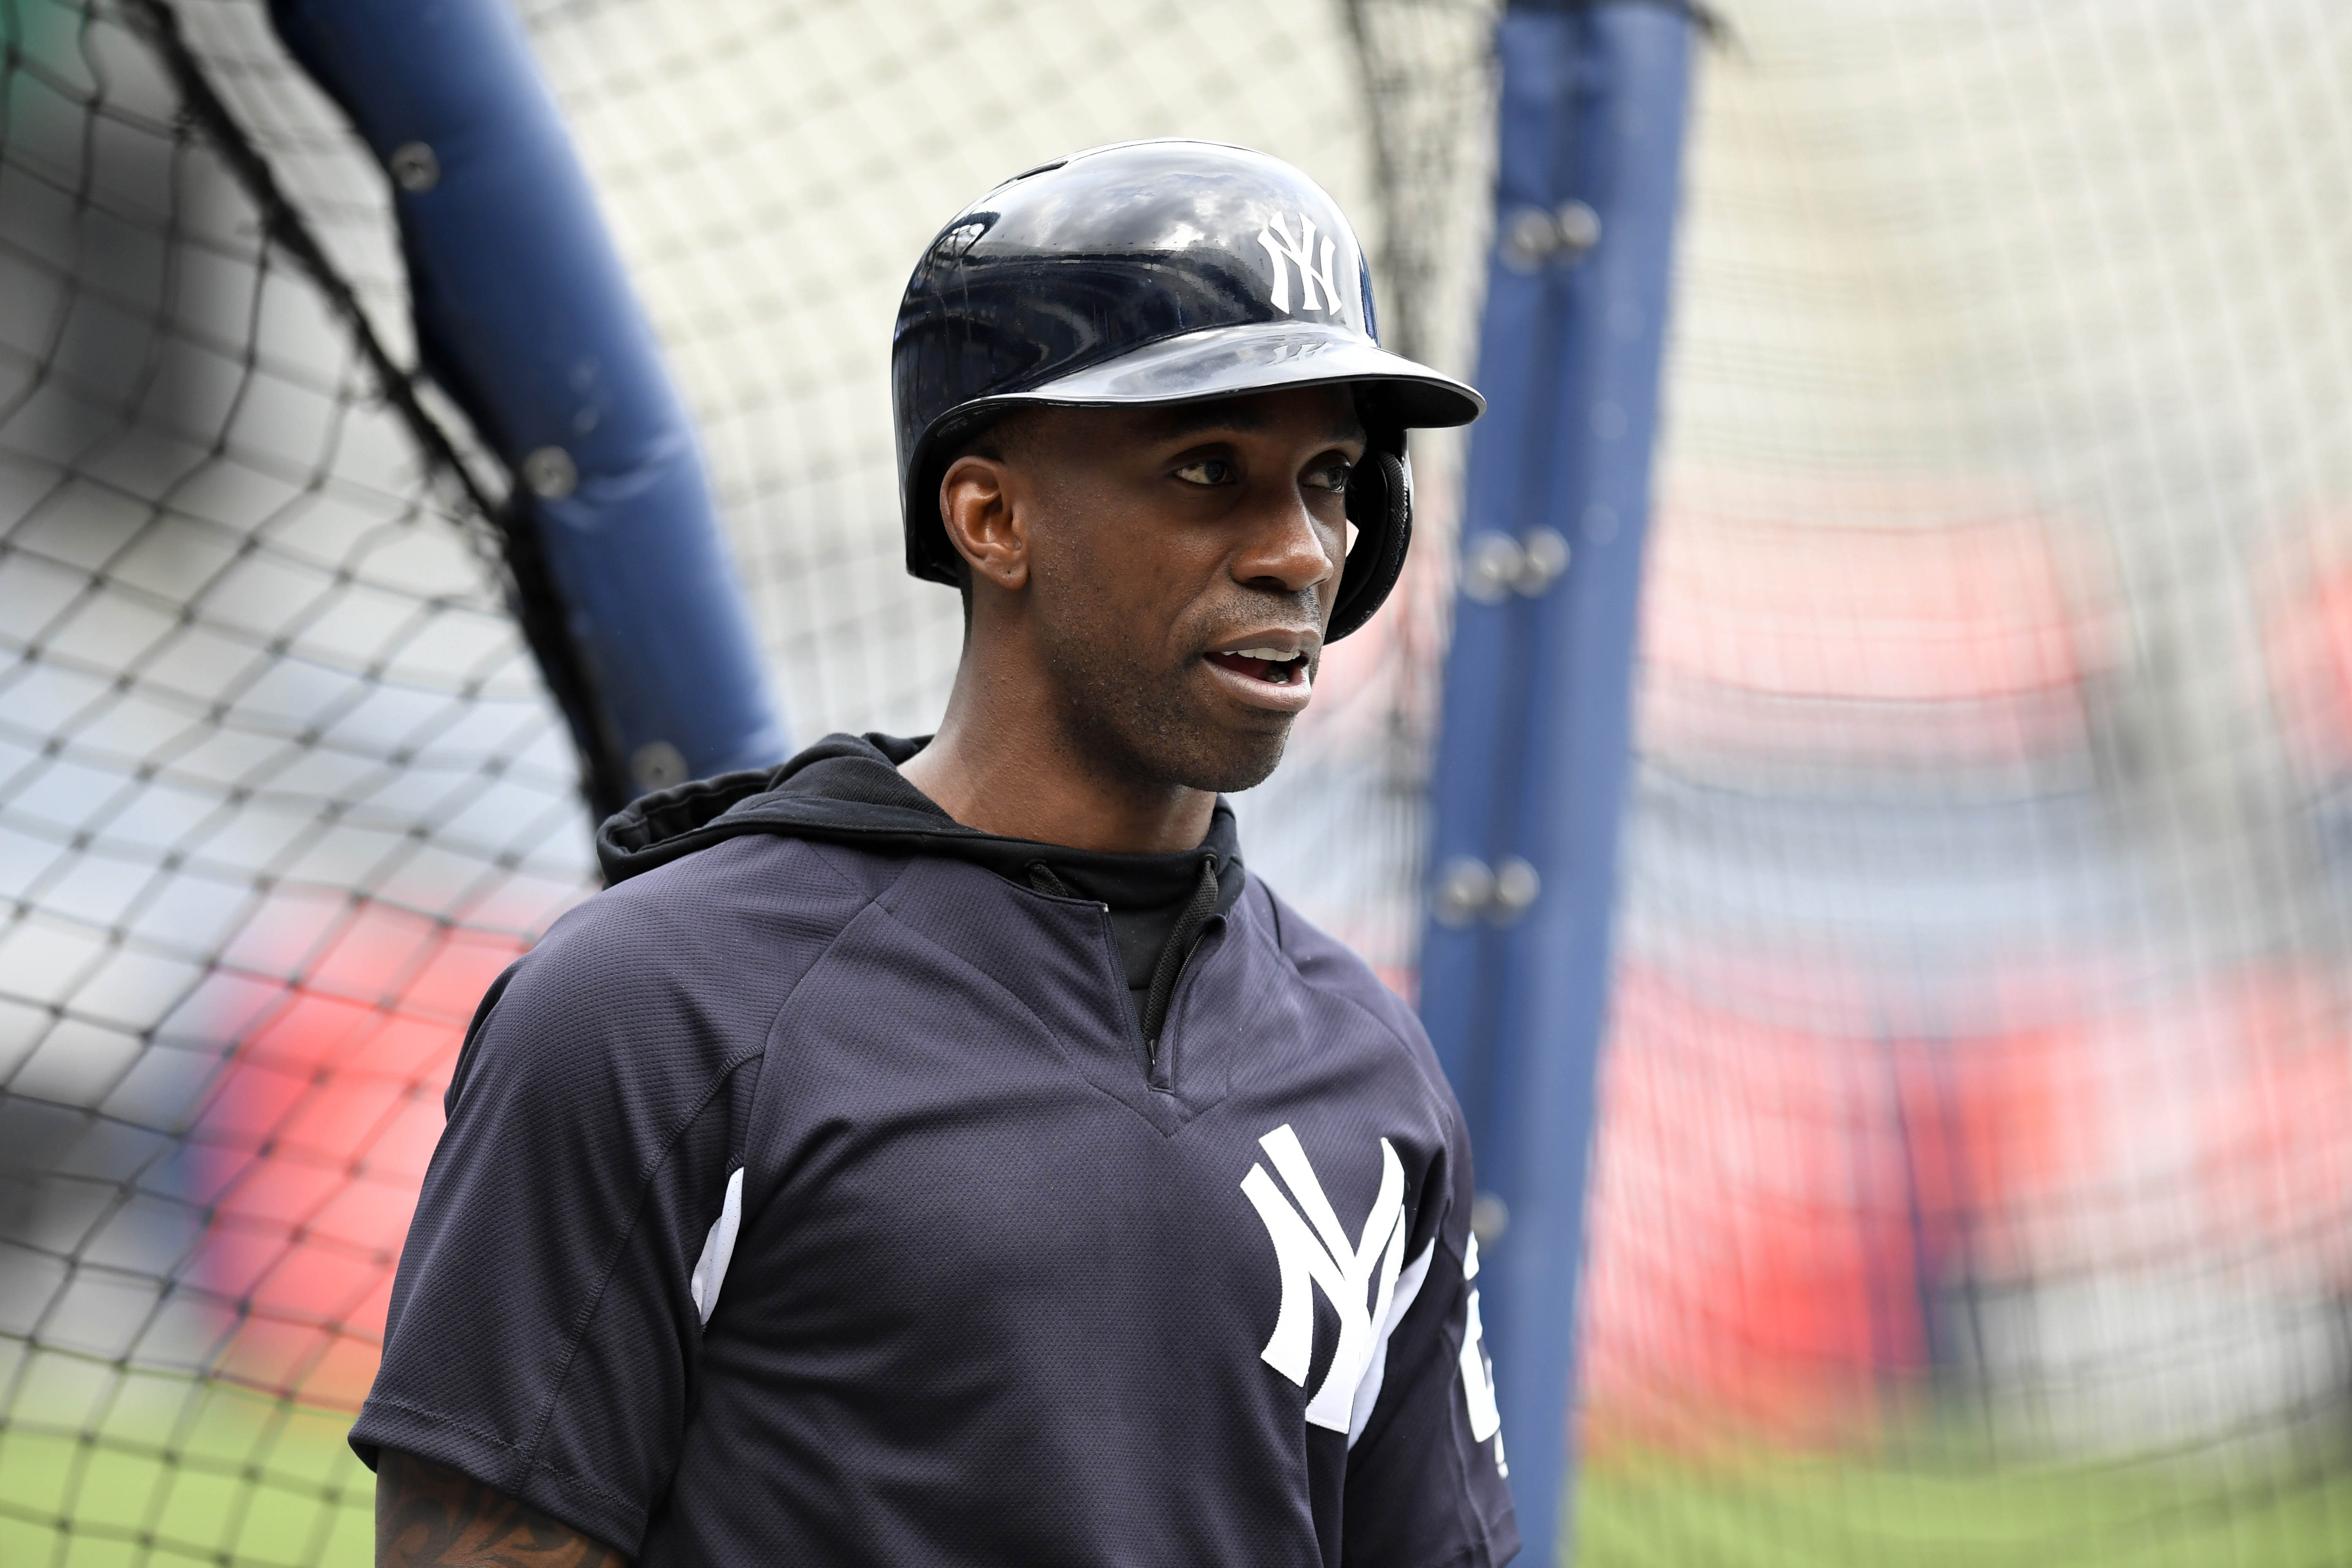 Reports: Phillies Signing Andrew McCutchen to Three Year Deal